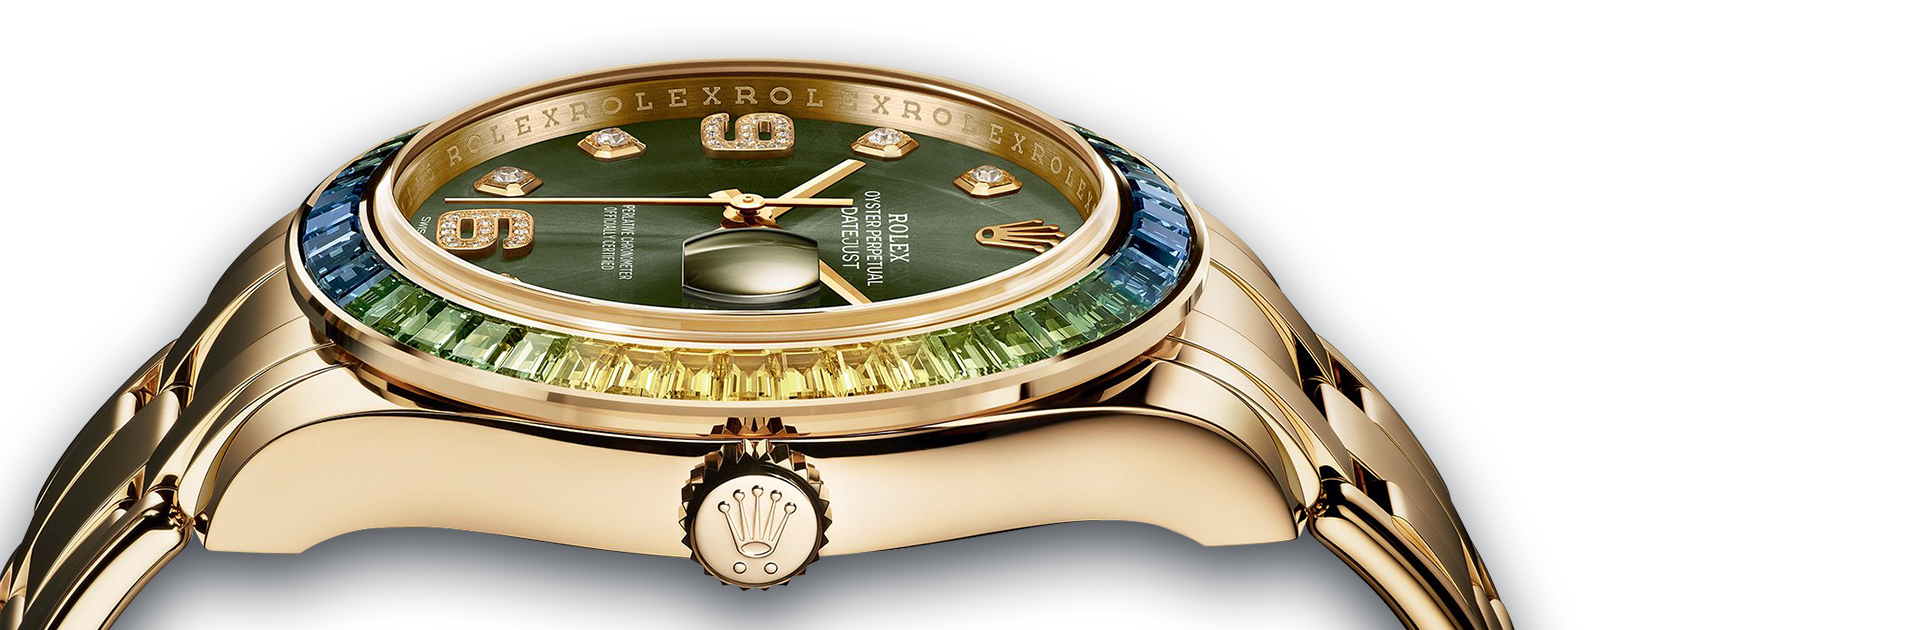 Rolex PNG High-Quality Image